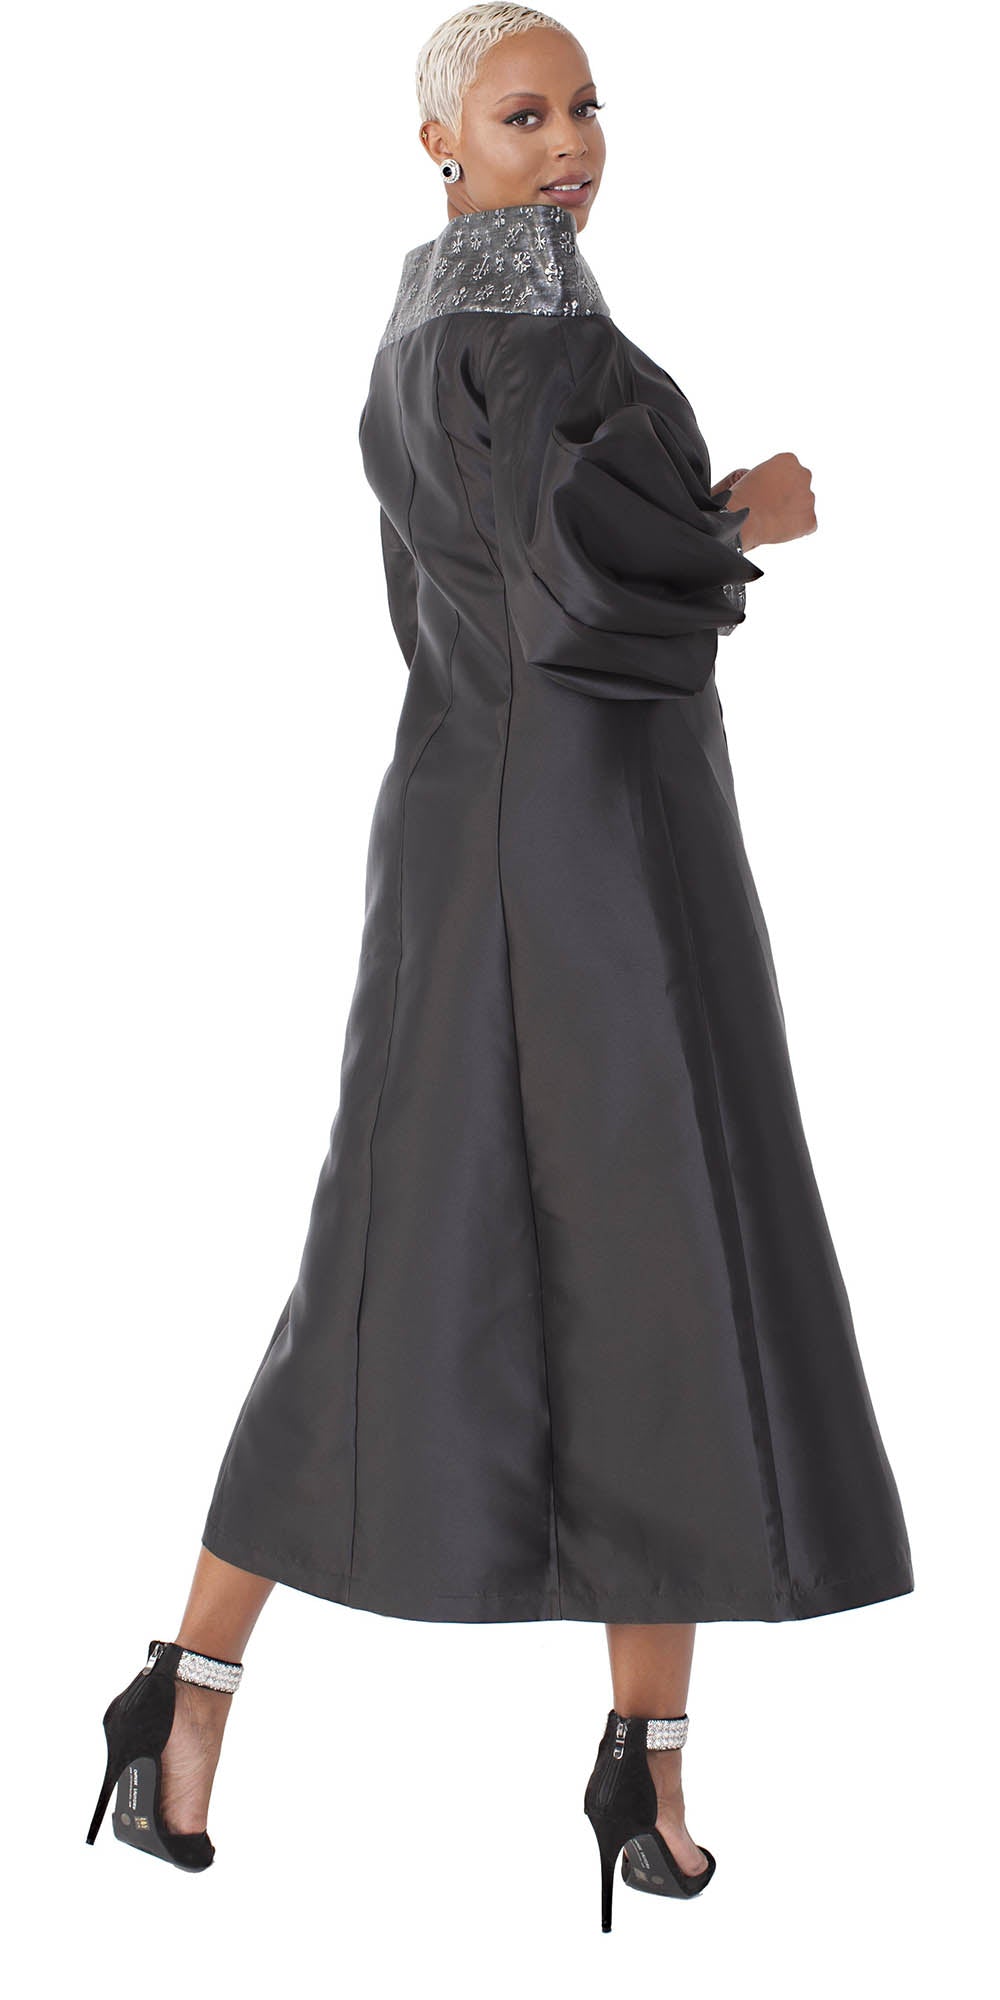 Tally Taylor - 4803 - Black - Women's Bishop Sleeve Clergy Robe with Contrast Portrait Collar